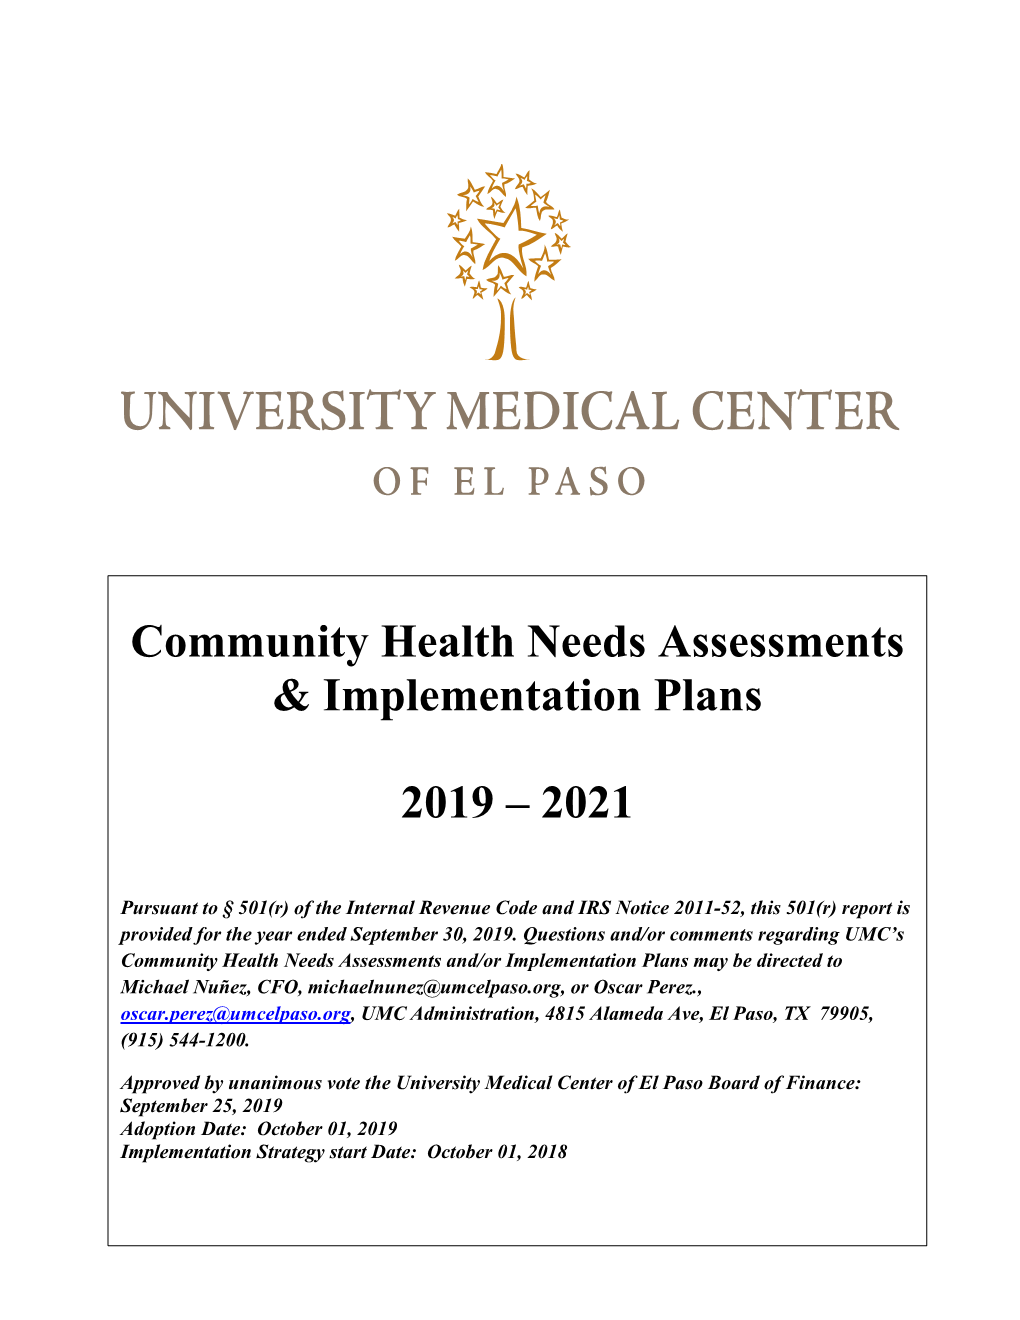 Community Health Needs Assessments & Implementation